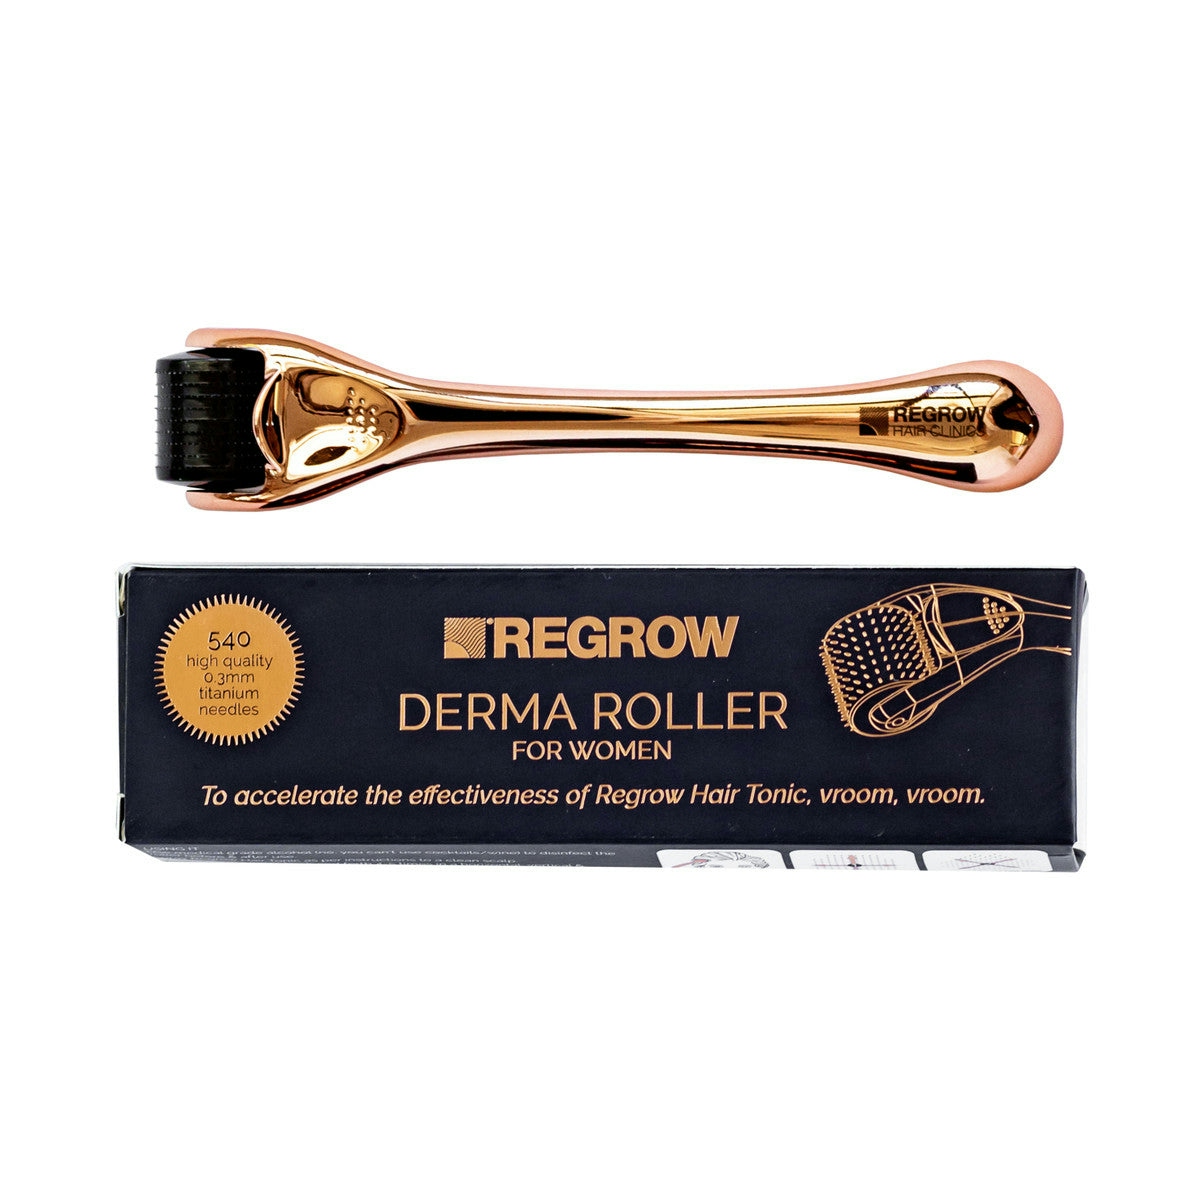 image of Regrow Hair Clinics Derma Roller For Women on white background 